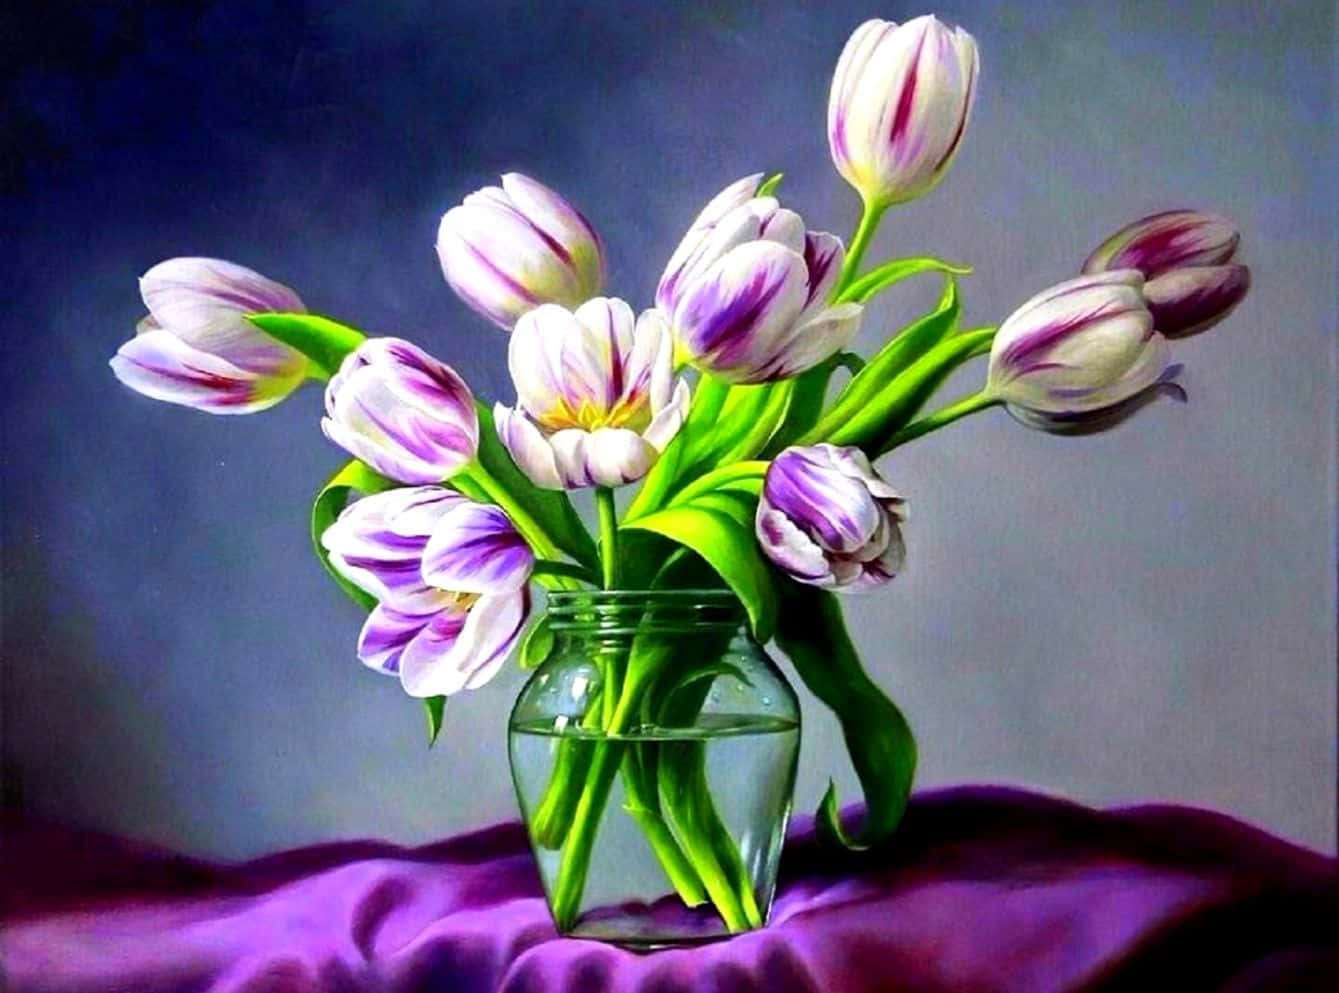 Aesthetic Blossoms - Exquisite Flower Painting Picture